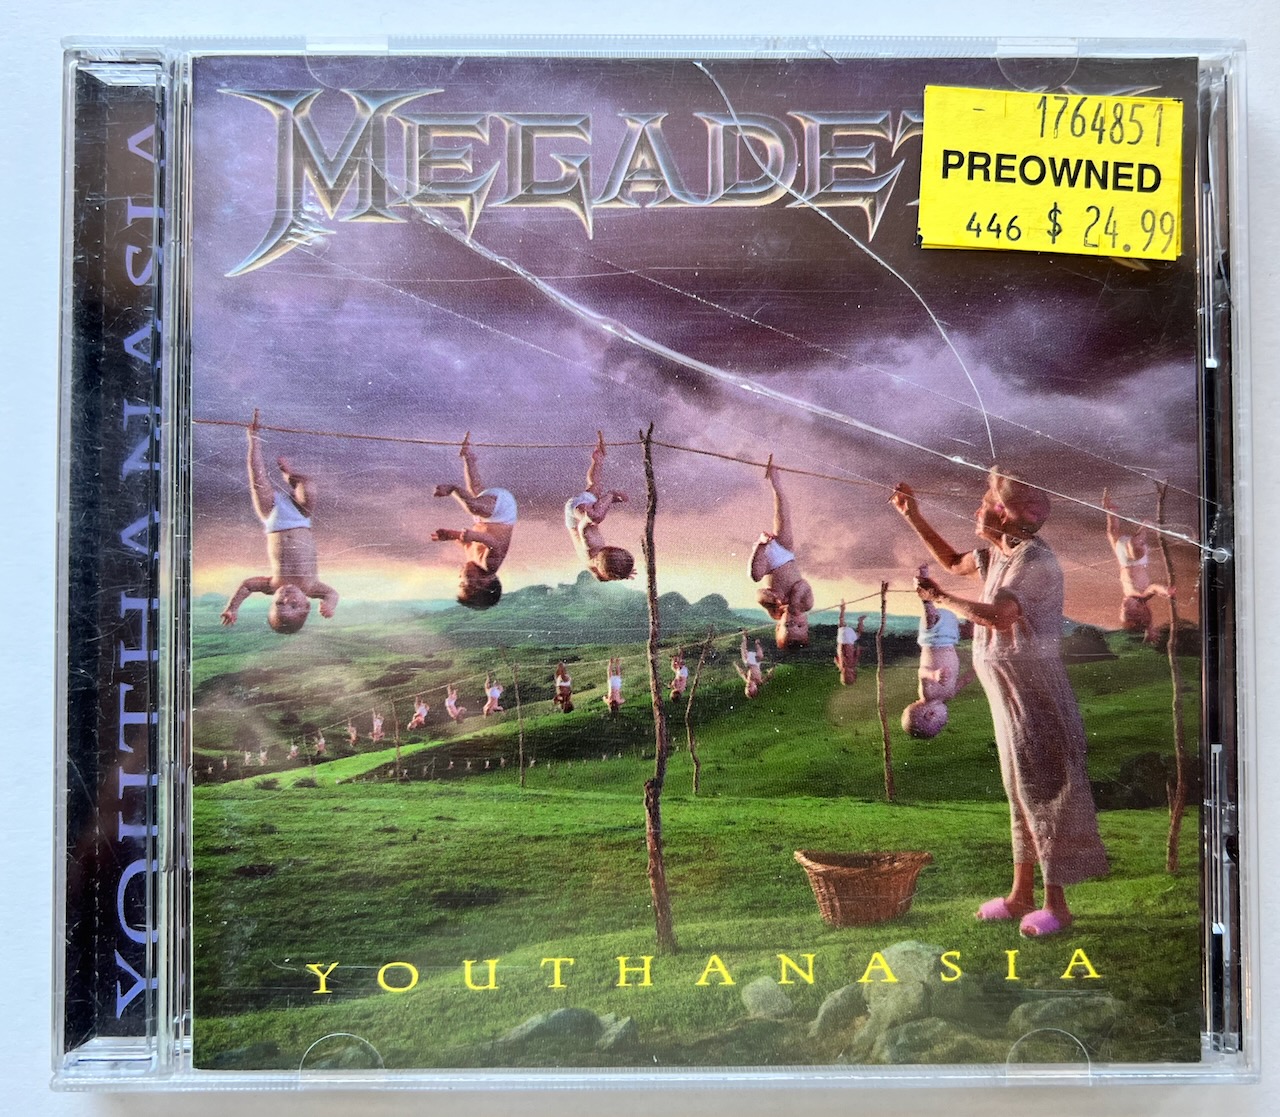 Cover of the Megadeth album Youthanasia with a $24.99 price tag on it.